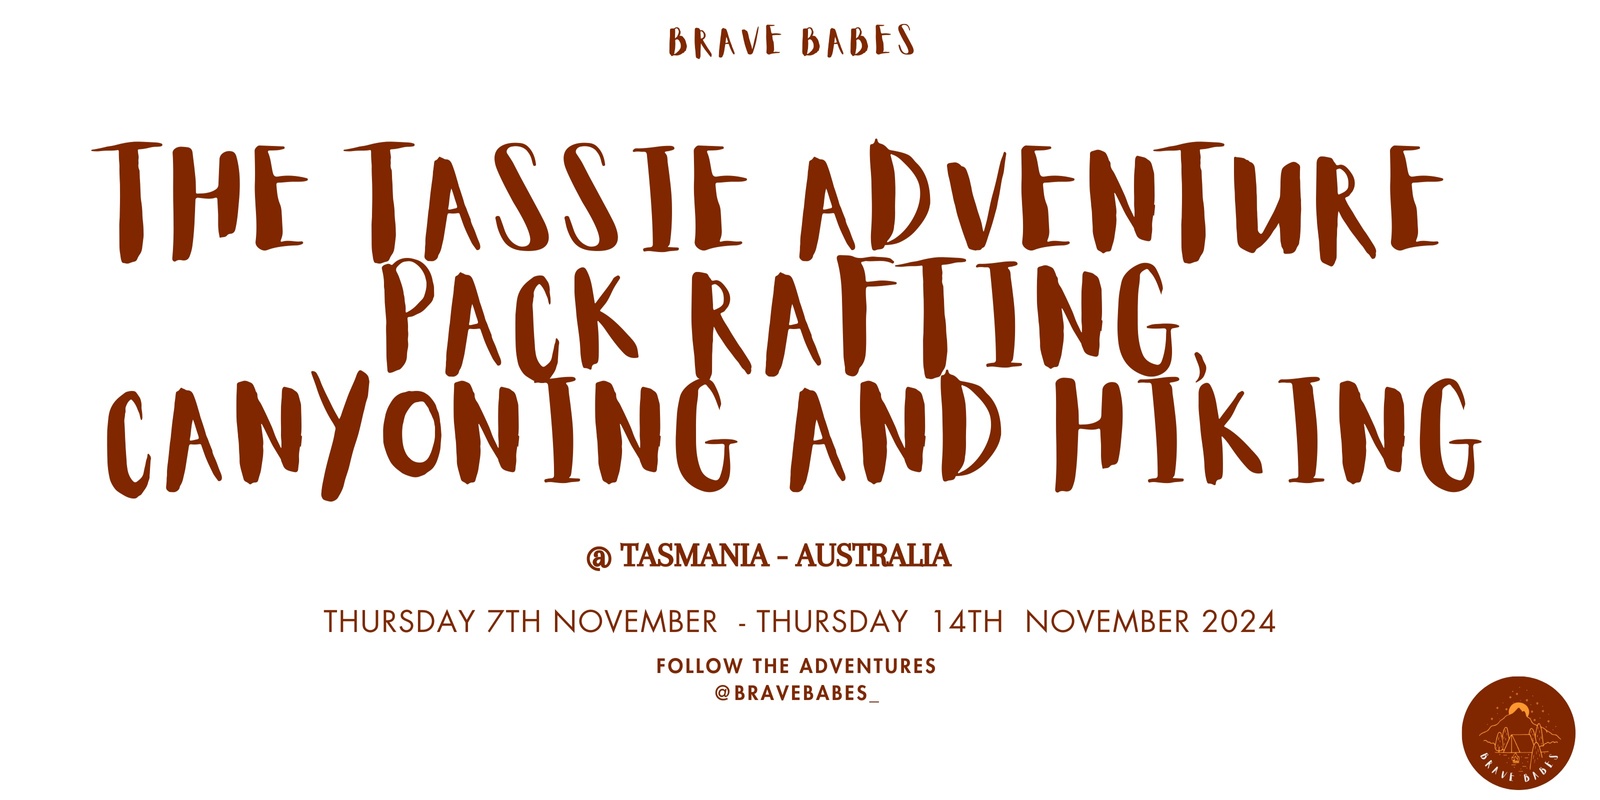 Banner image for The Tassie Adventure - Packrafting, Canyoning and Hiking!